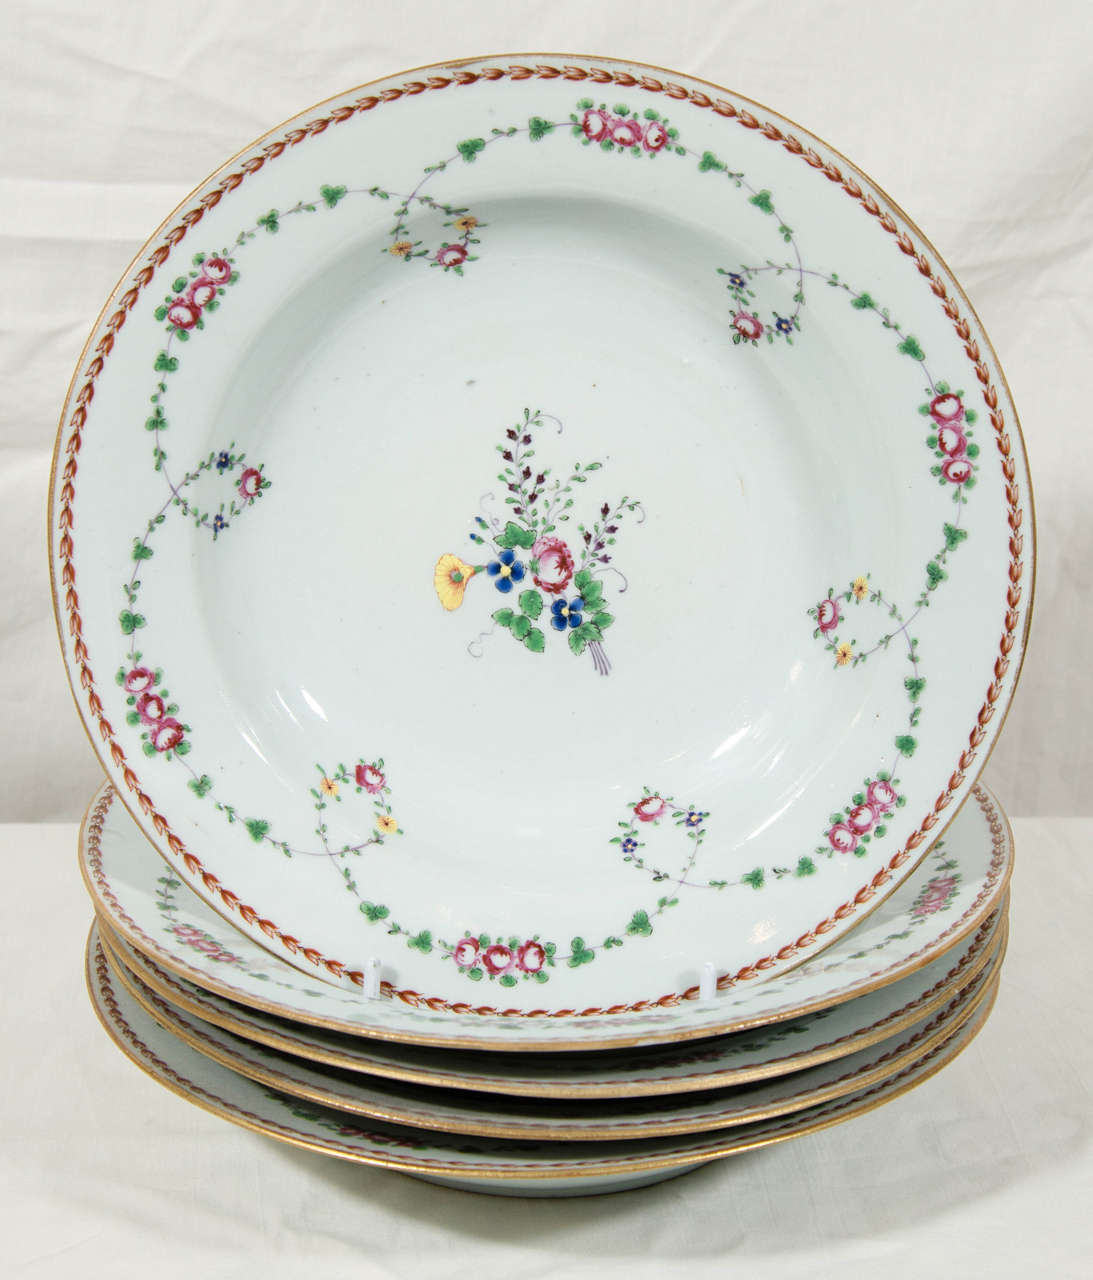 Provenance: With paper stickers for the eminent dealer of Chinese porcelains Elinor Gordon. Decorated in the 18th century French taste with a delicate sprig of peonies and cornflowers encircled by swags with pink peonies and green leaves.